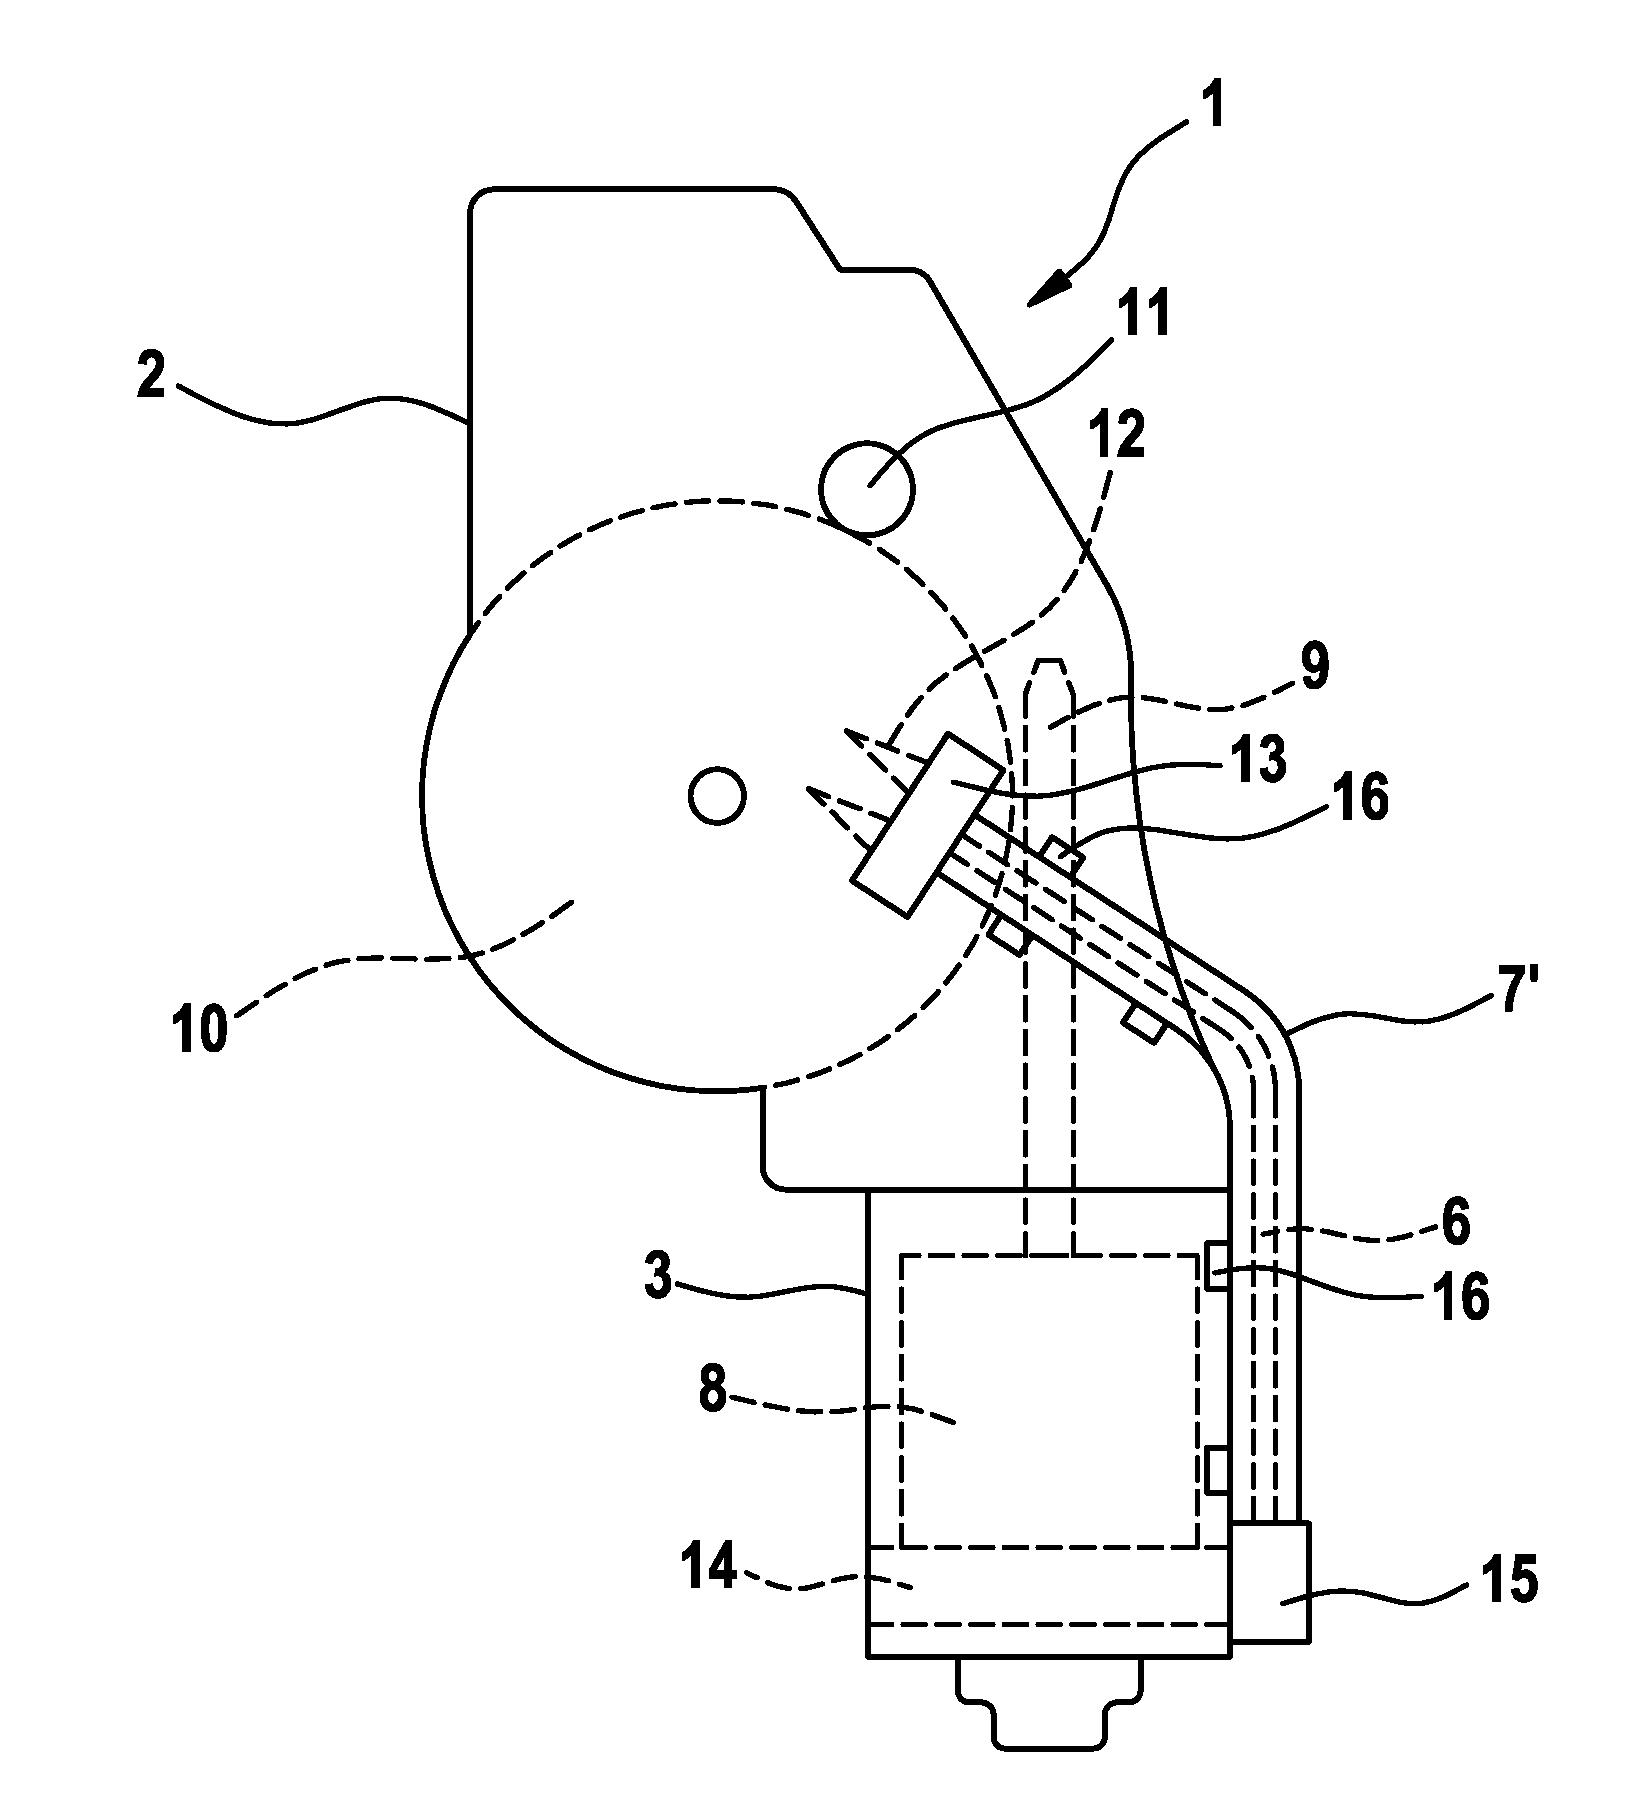 Connection system comprising an external cable guide on wiper motor housings